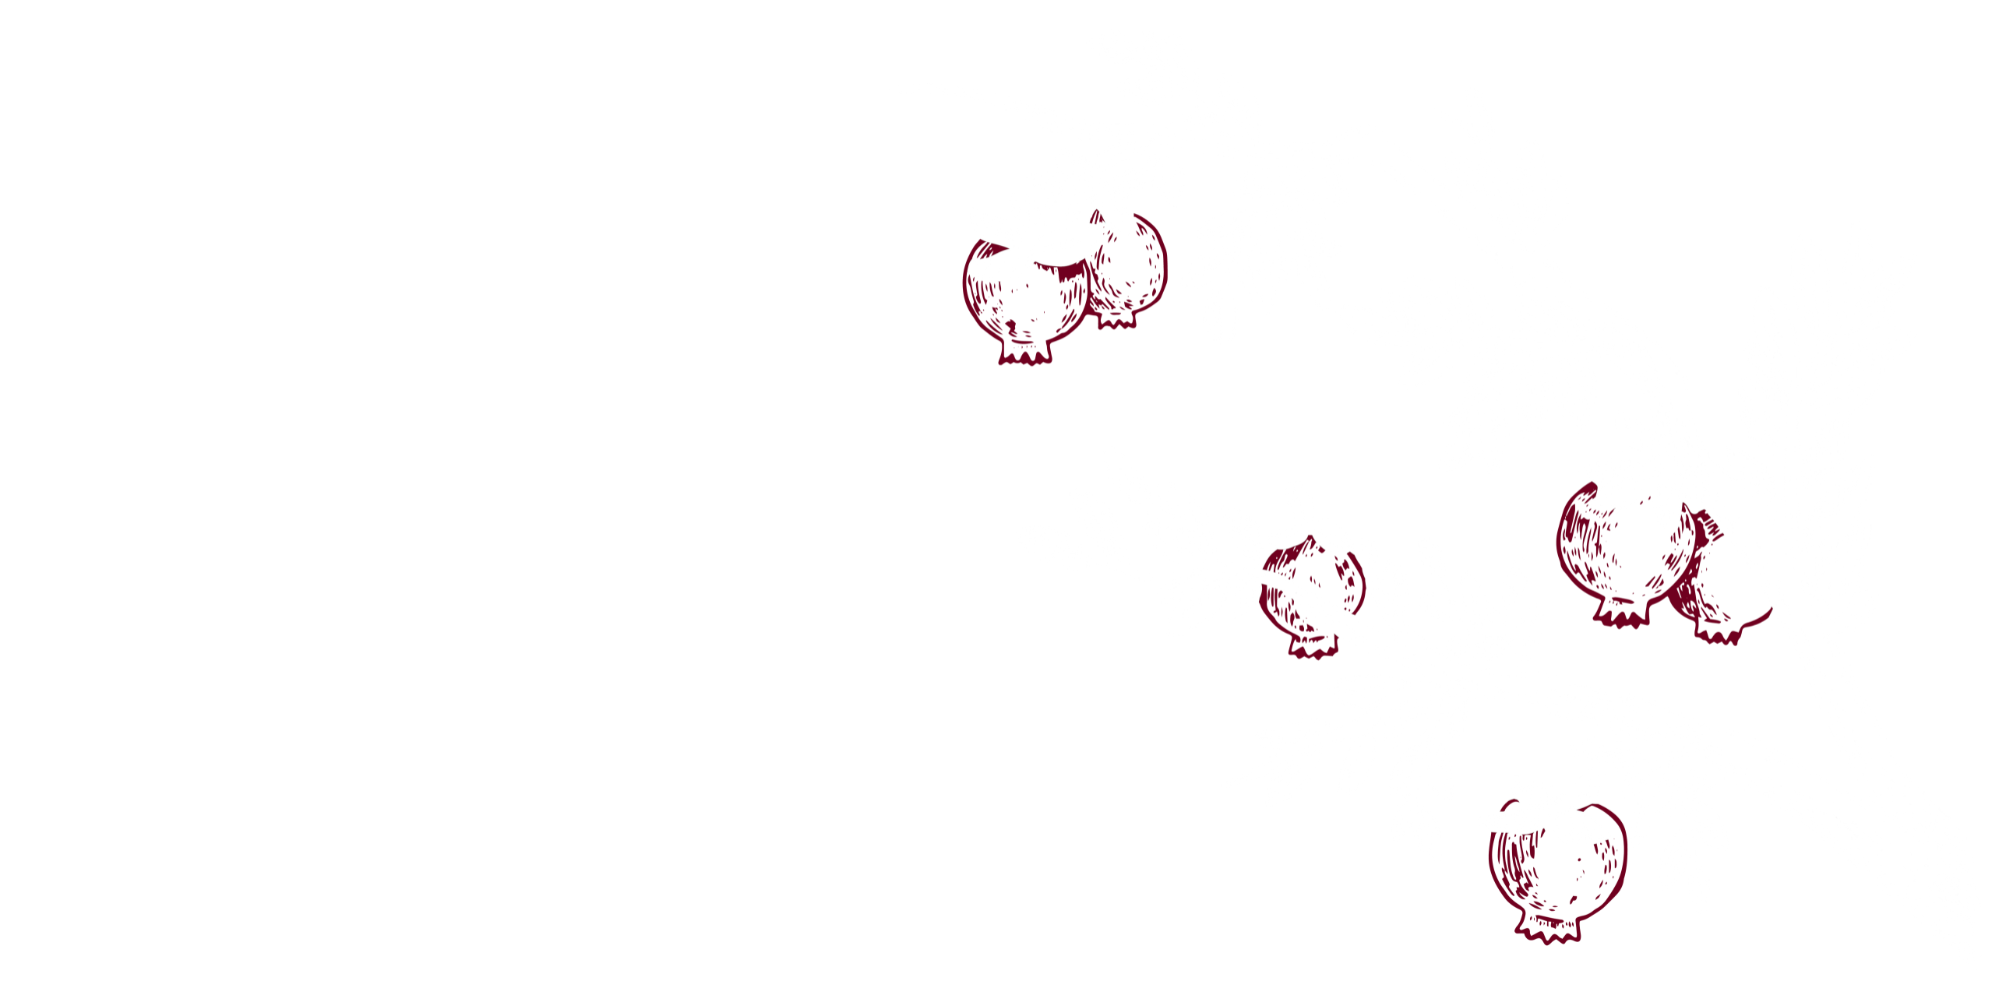 Pomegranate and Spice